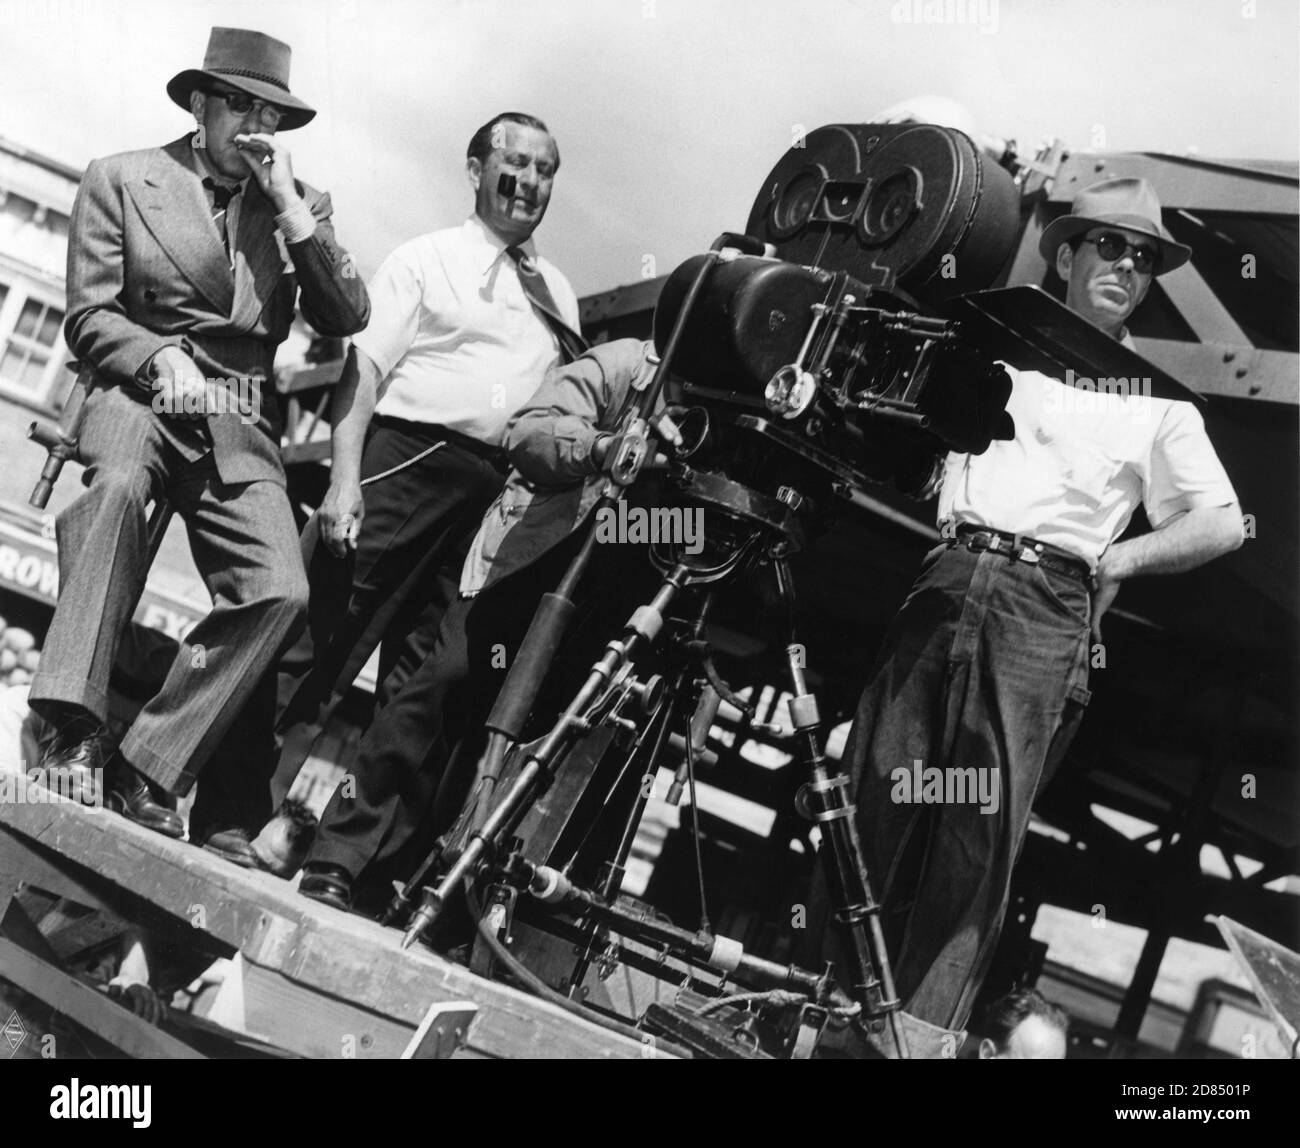 Director RAOUL WALSH and Cinematographer ARTHUR EDISON on set candid with Camera Crew during filming of THEY DRIVE BY NIGHT 1940 director RAOUL WALSH associate producer Mark Hellinger executive producer Hal B. Wallis Warner Bros. Stock Photo